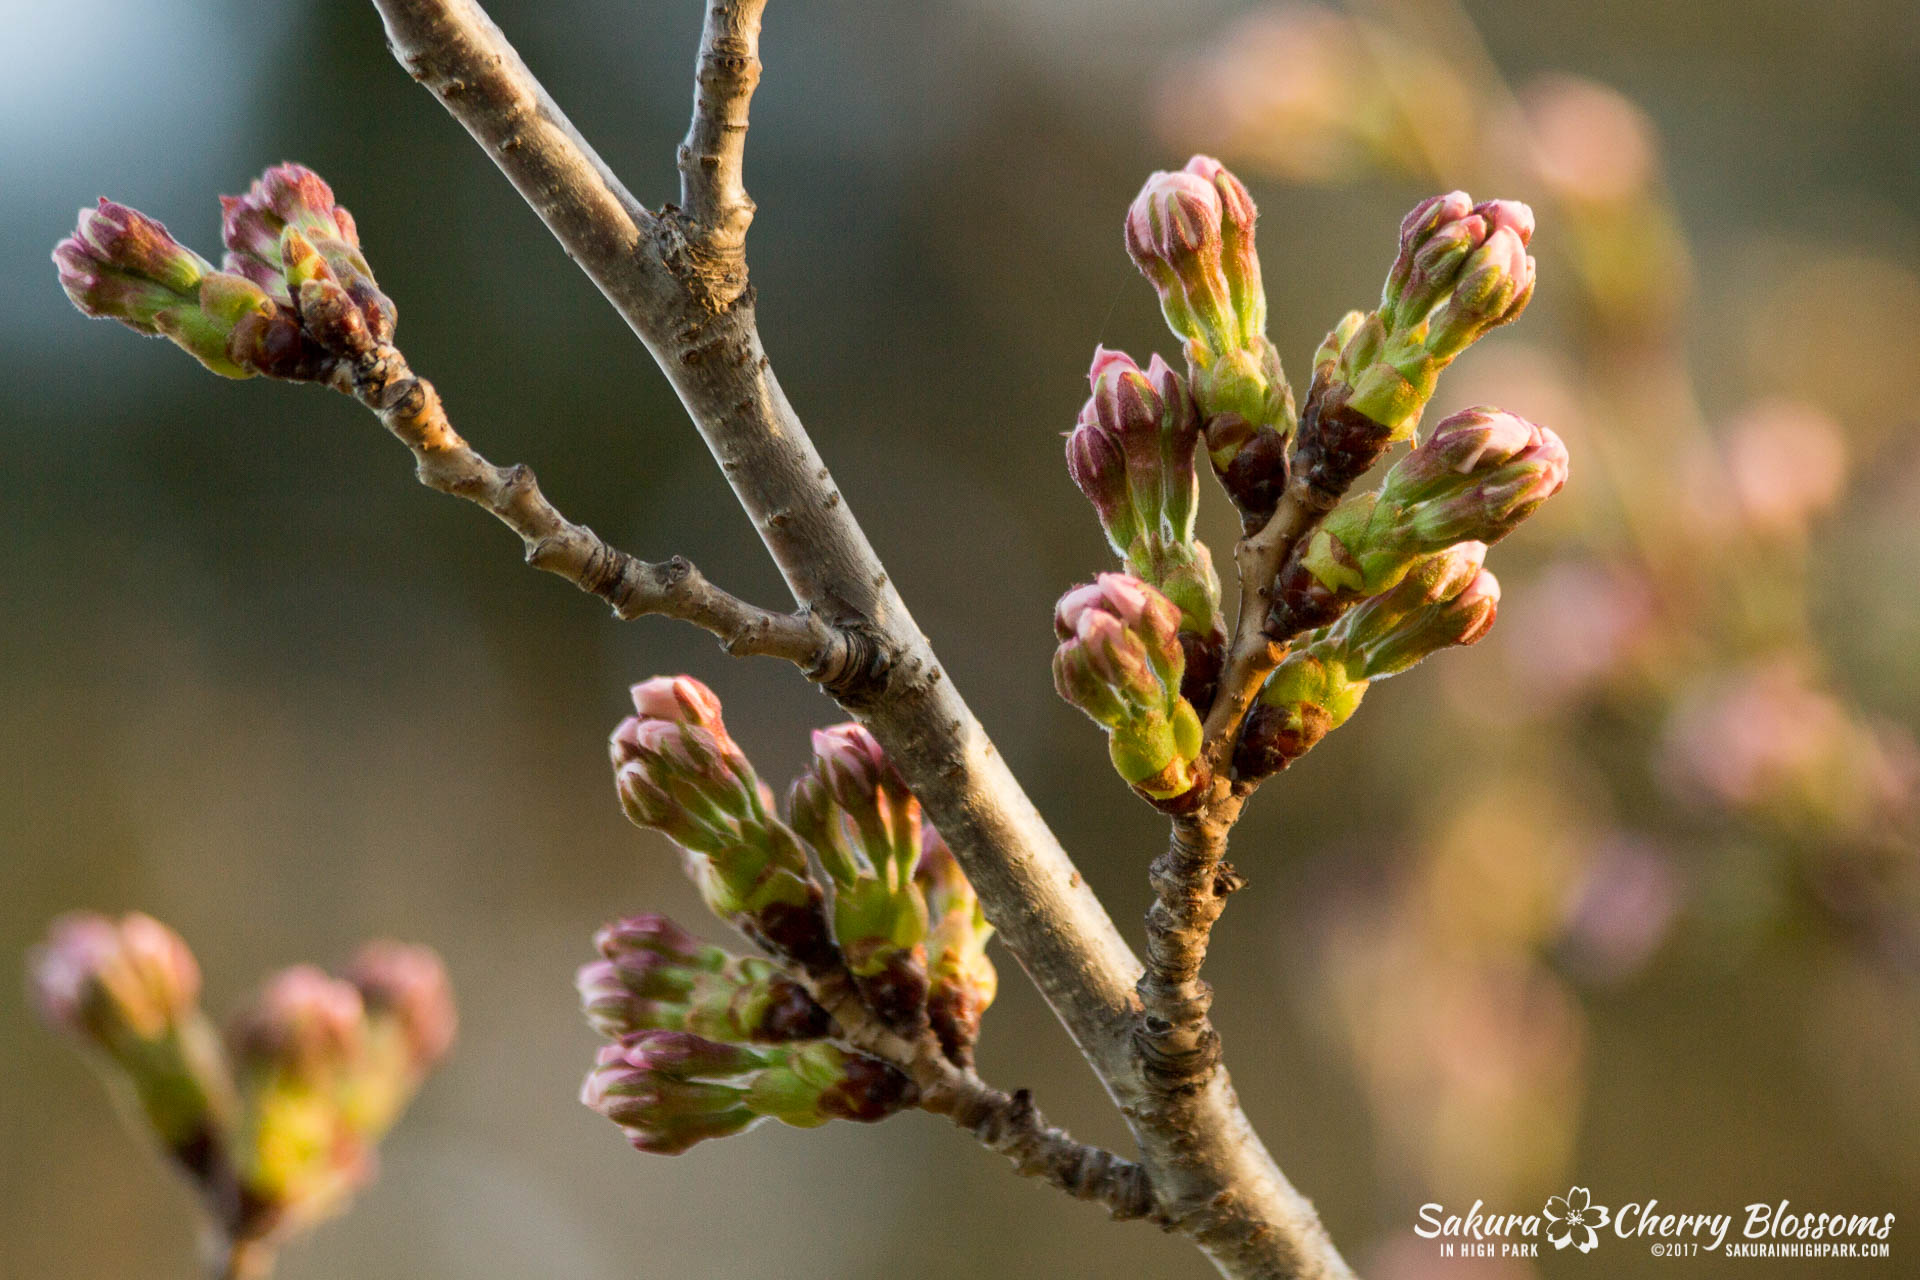 Sakura-in-High-Park-April-17-2017-florets-are-emerging-from-the-buds-throughout-the-park-31.jpg